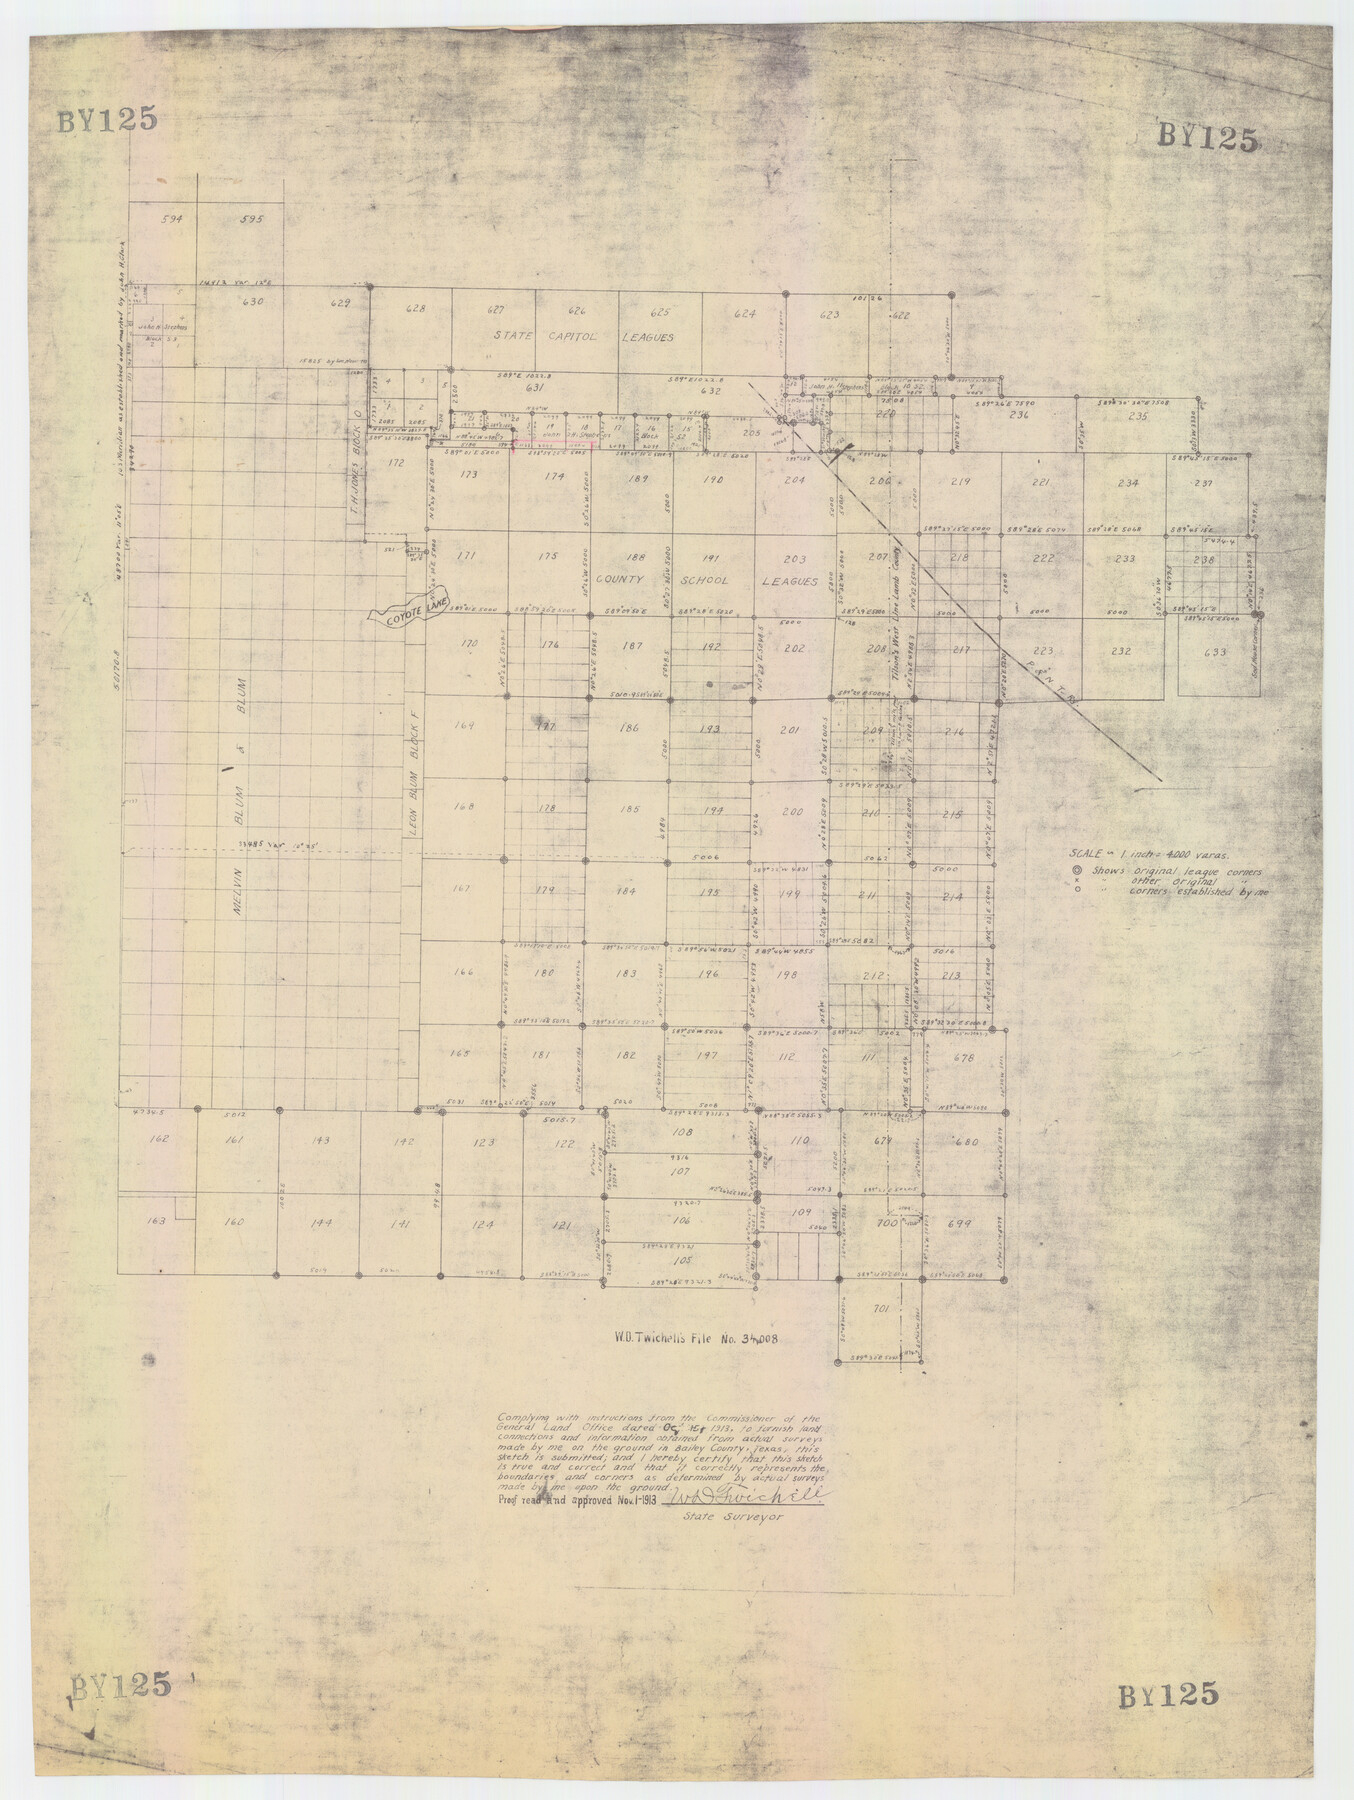 92535, [State Capitol Leagues, County School Leagues, and vicinity], Twichell Survey Records